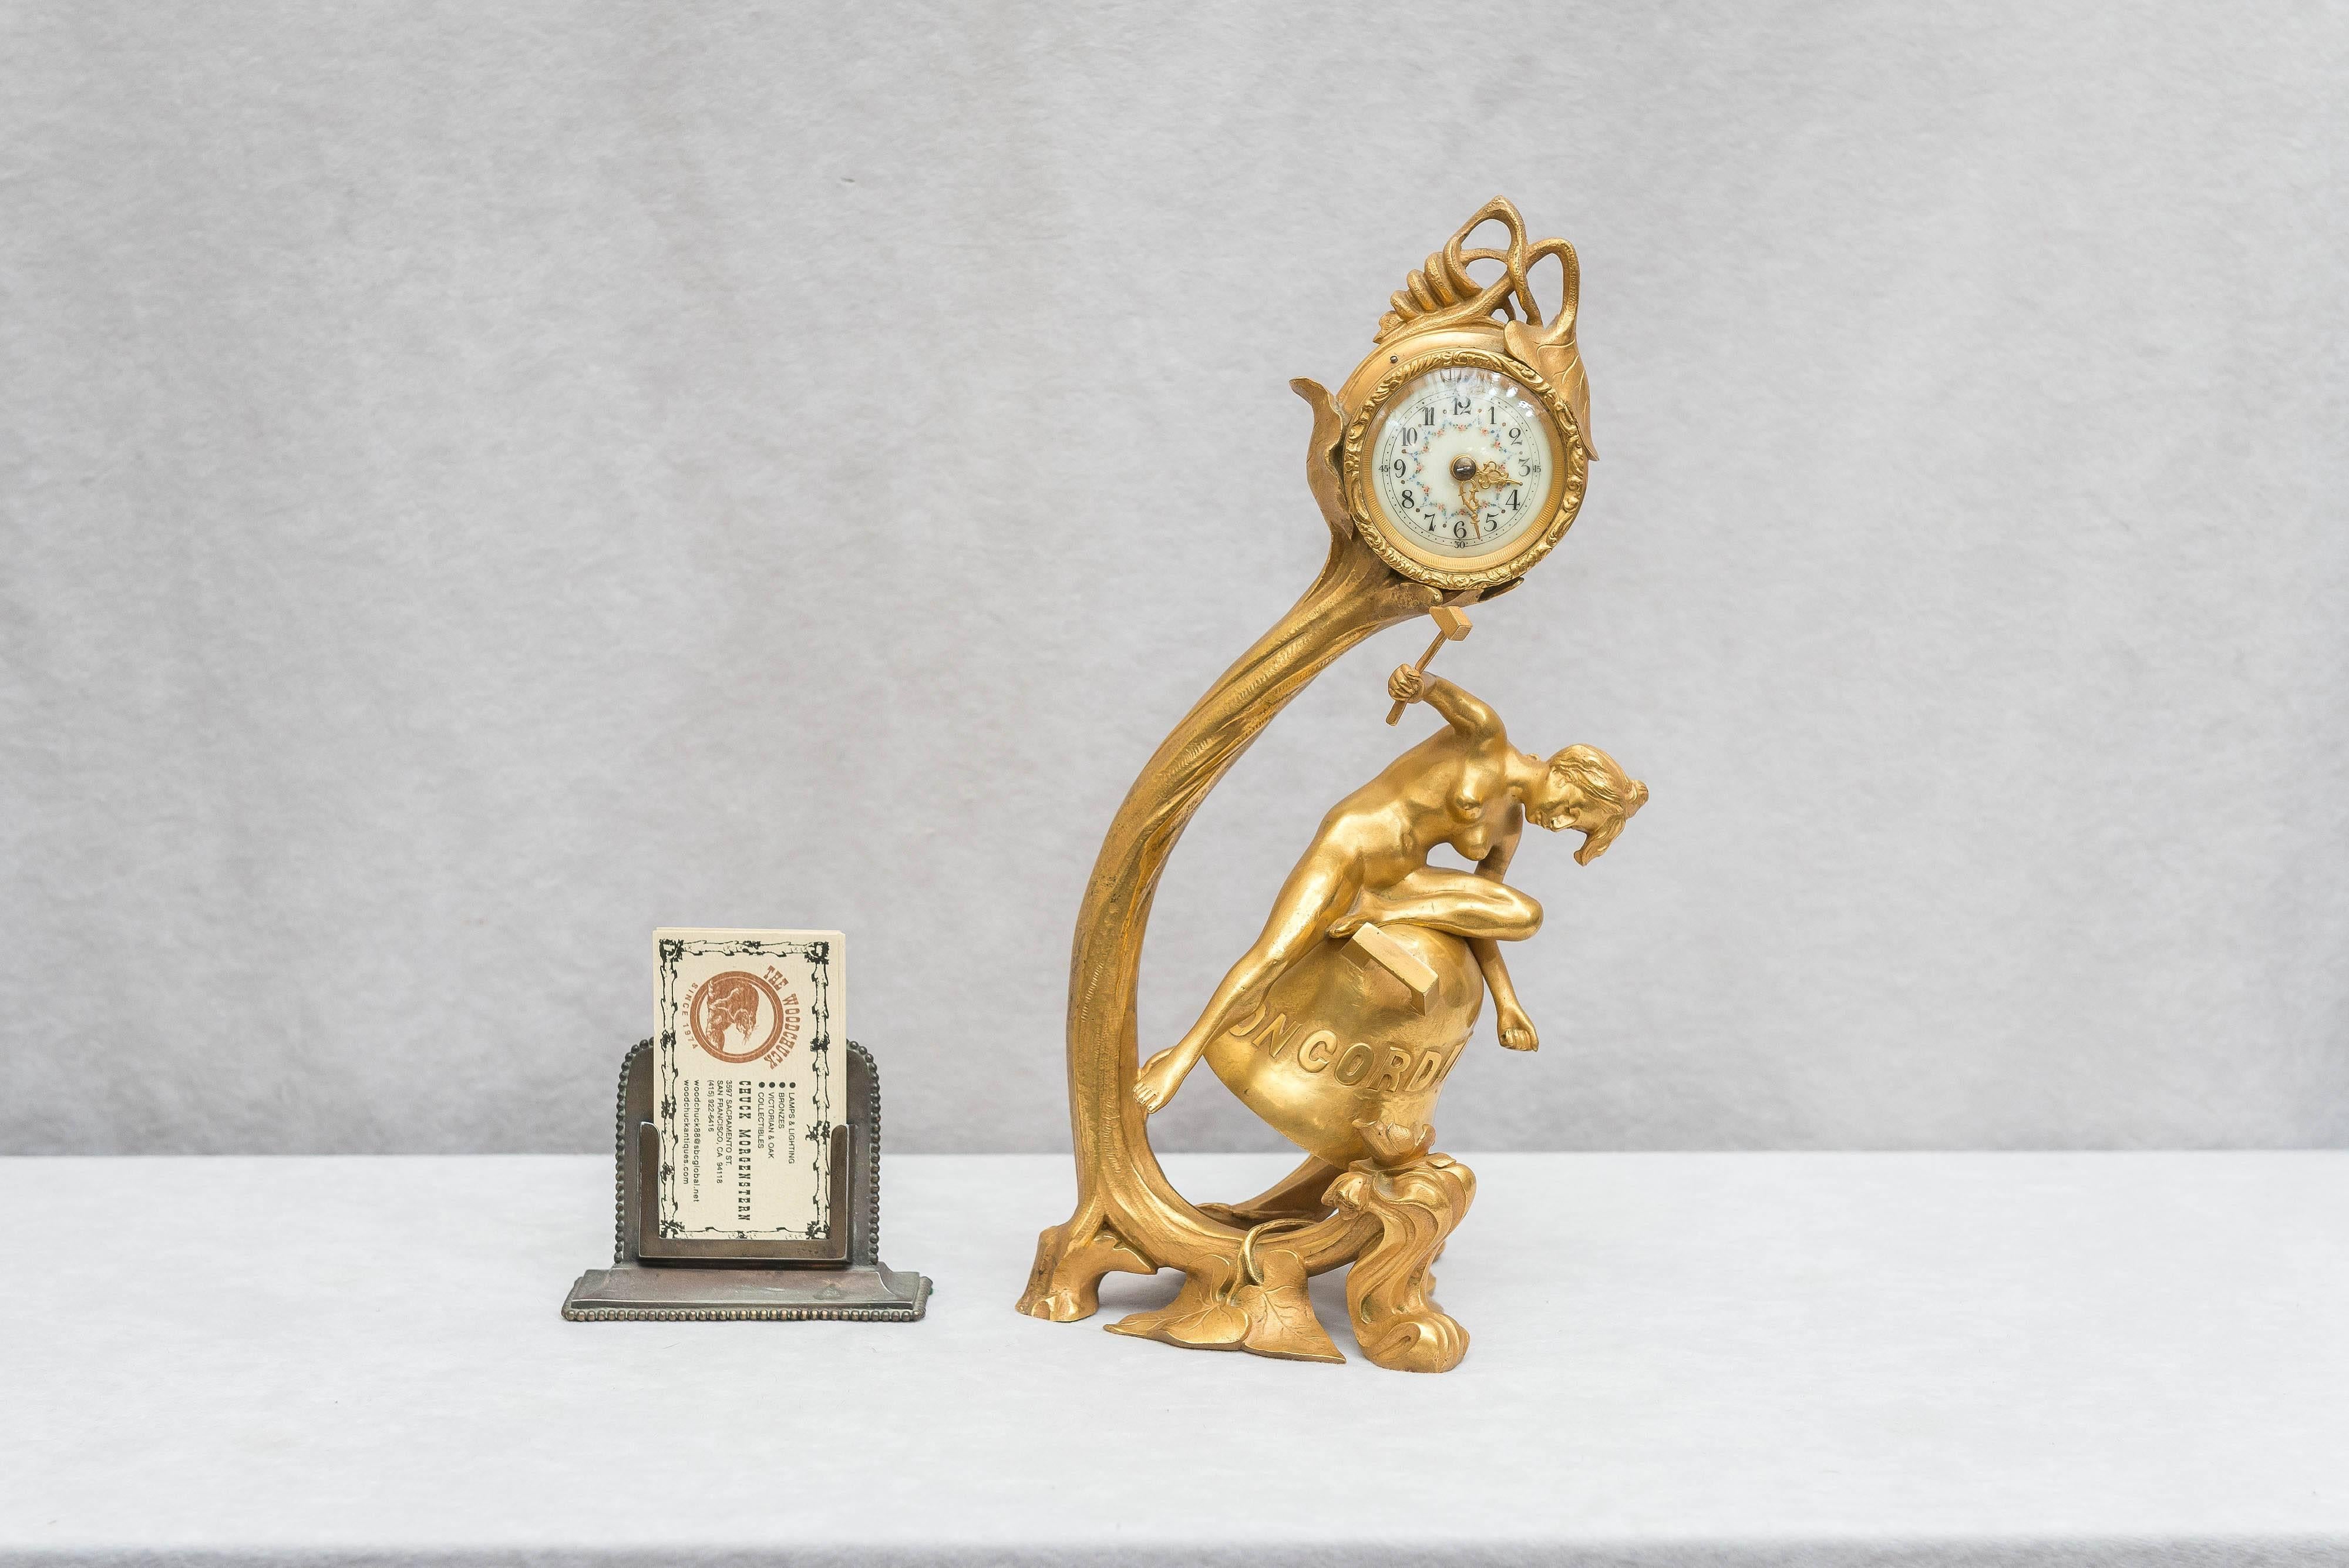 If you love art nouveau as much as we do, this clock should really appeal to you. From front to back it shows off the grace and beauty of the art nouveau movement. Normally the gilding is either worn, or has turned black. The gilding here is in